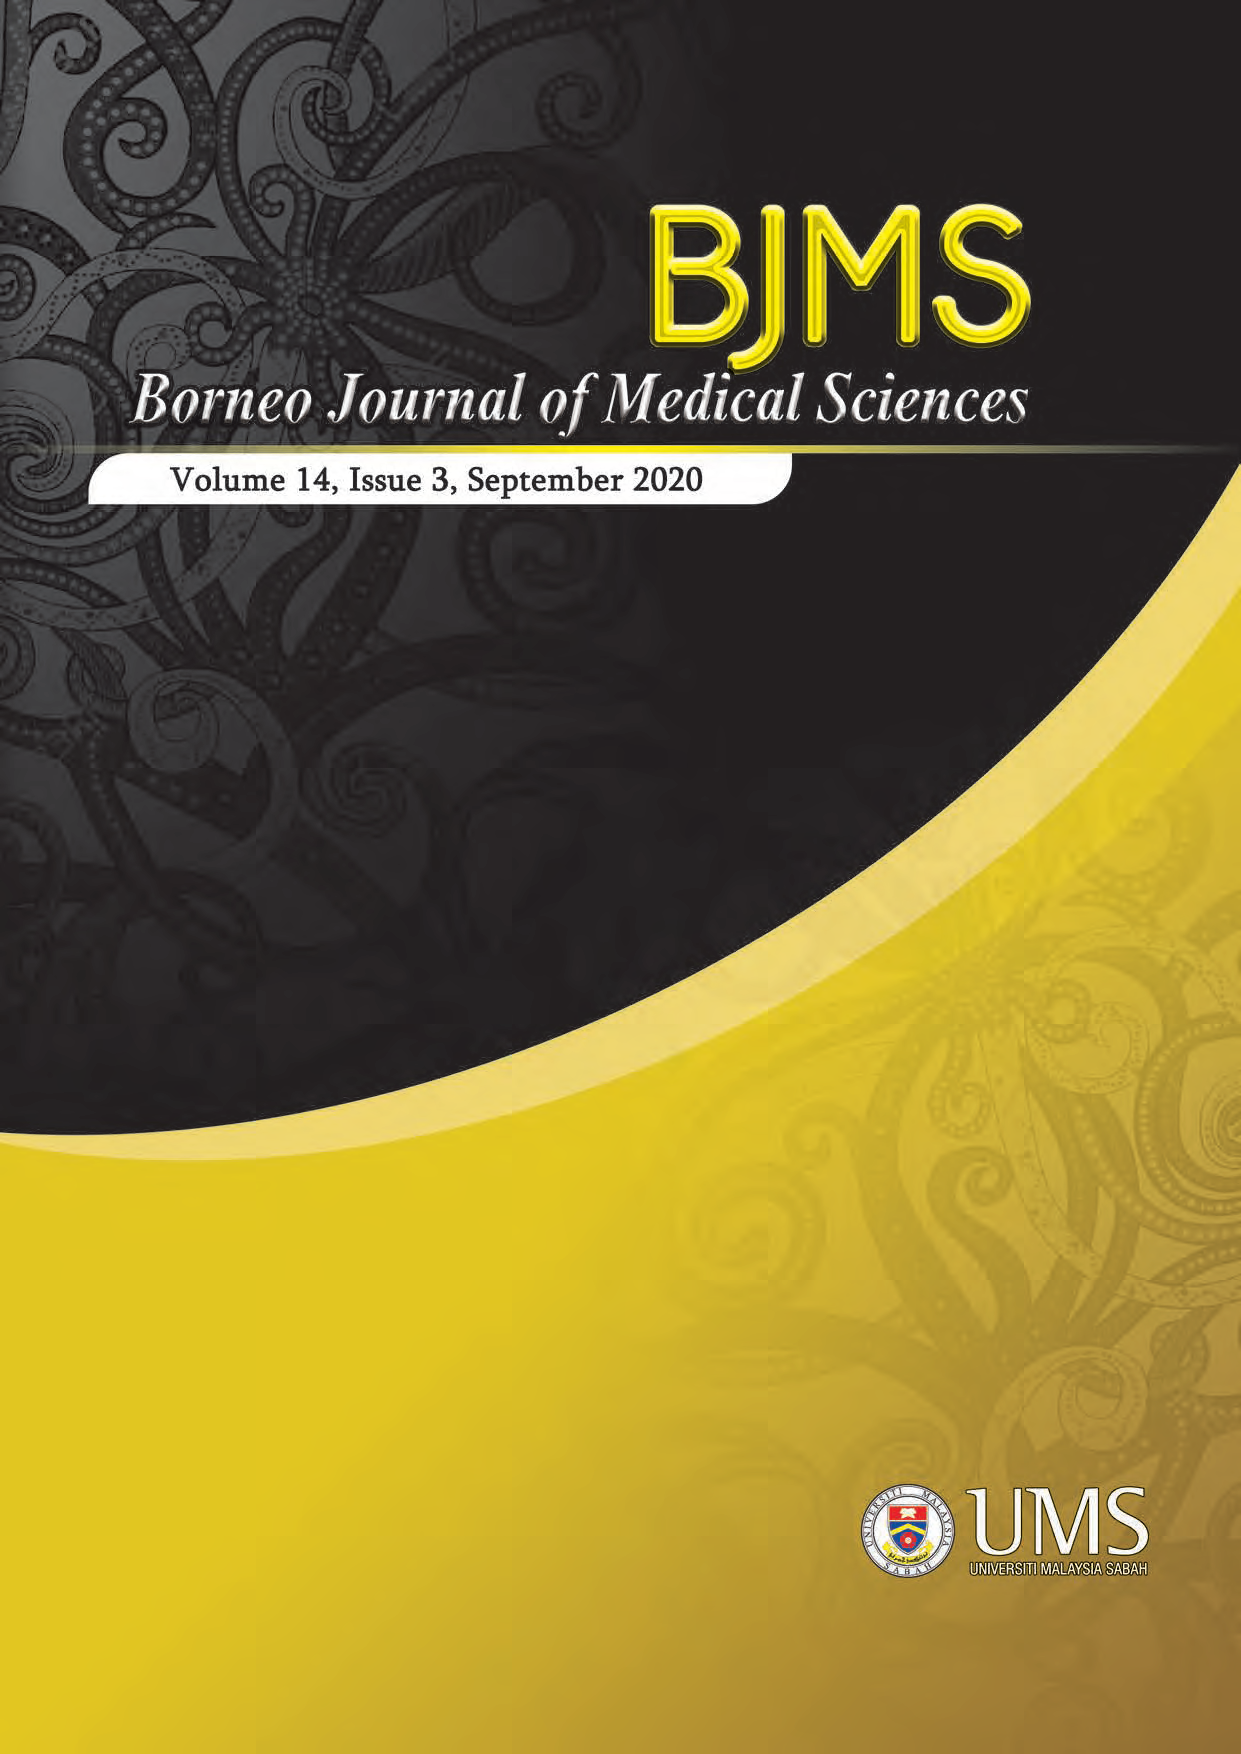 					View Vol. 14 No. 3 (2020): BORNEO JOURNAL OF MEDICAL SCIENCES VOLUME 14, ISSUE 3, SEPTEMBER 2020
				